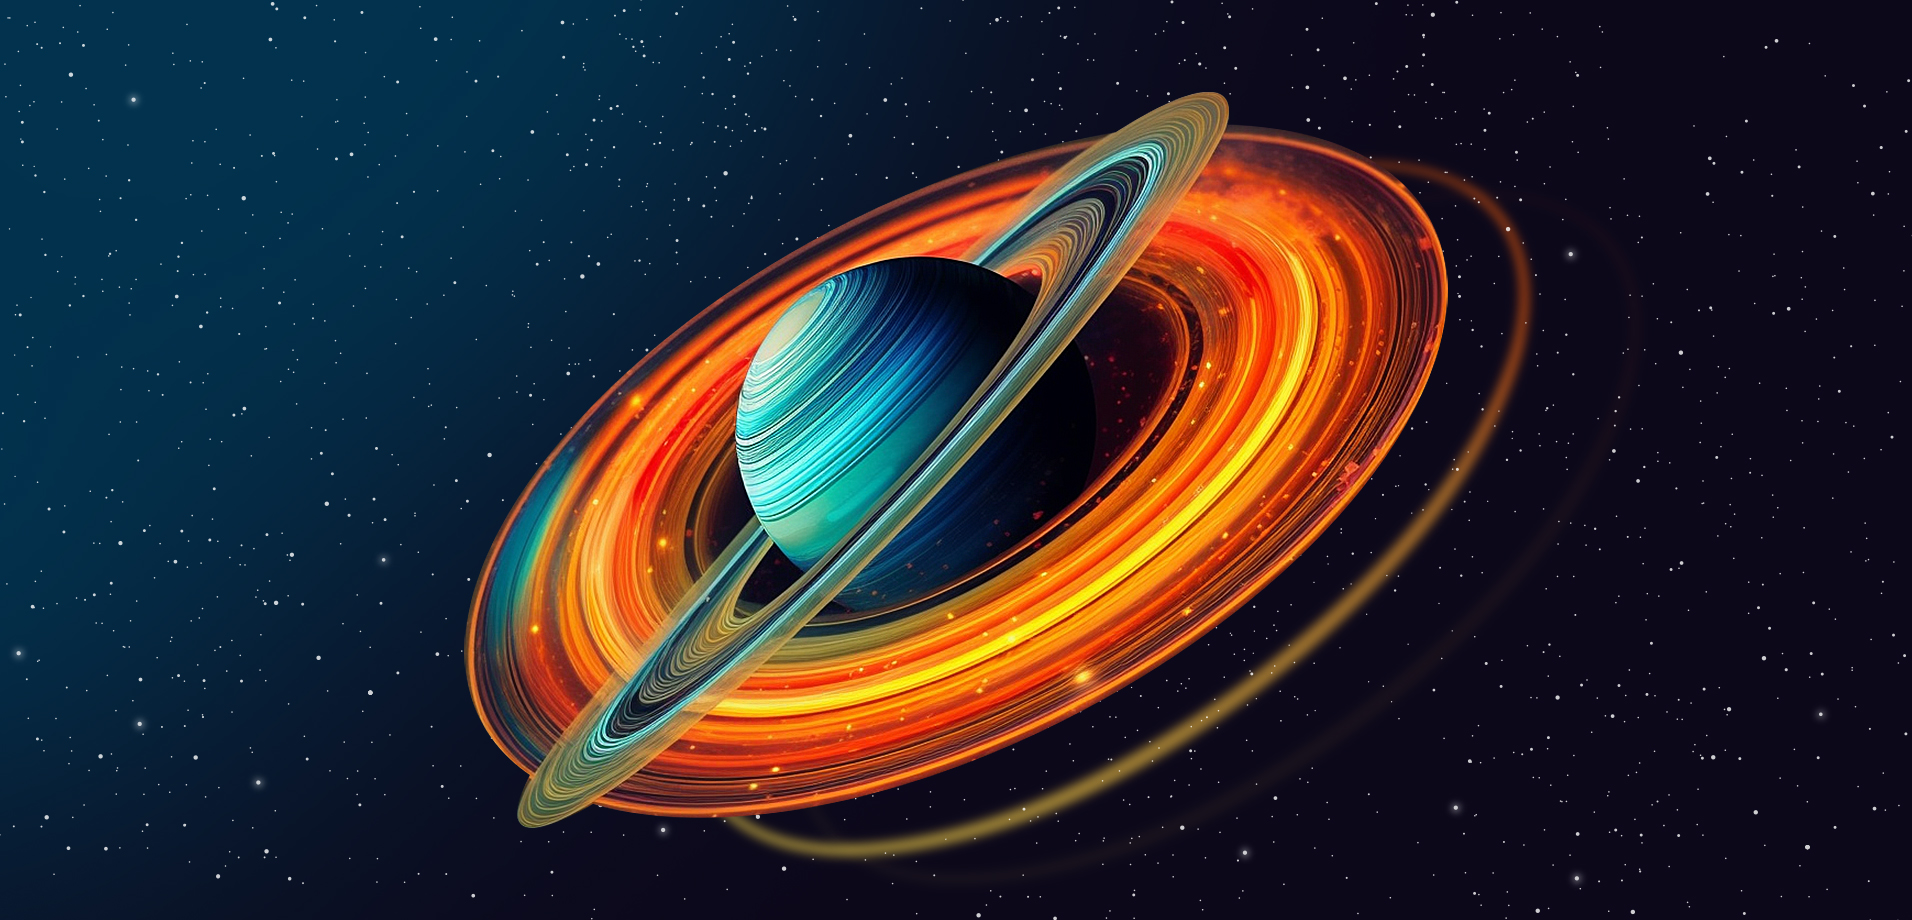 The Pearl of the Solar System: What is Saturn’s colour, really?